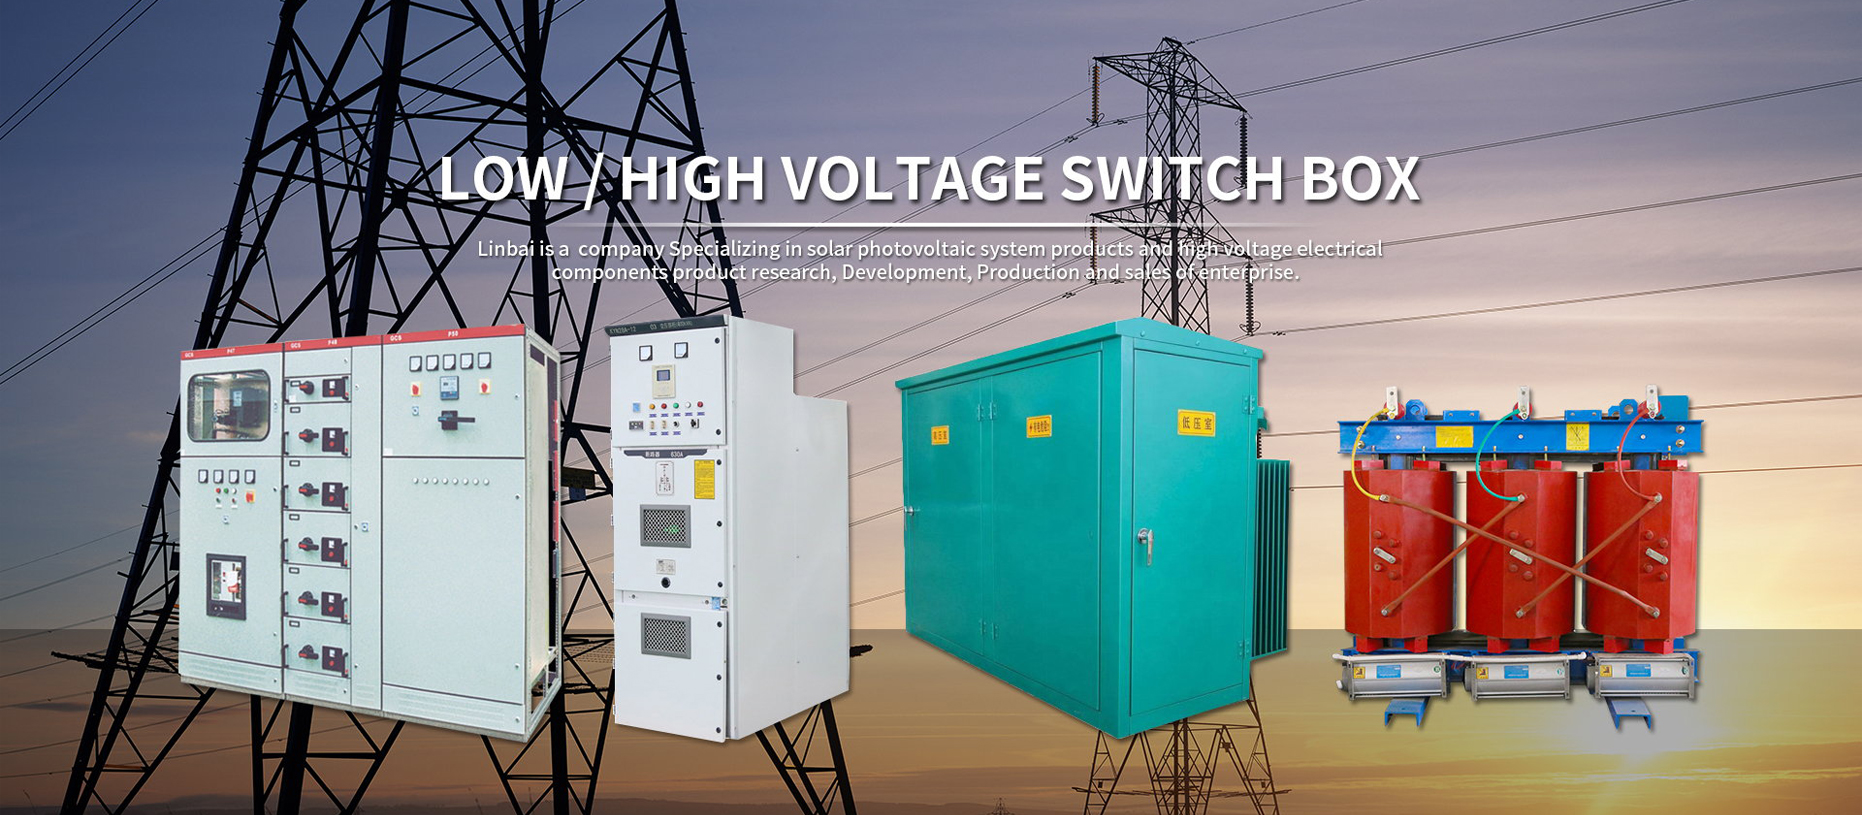 CLBE high-voltage circuit breakers, transformers, transformers, distribution boxes, switch cabinets, substations and other products